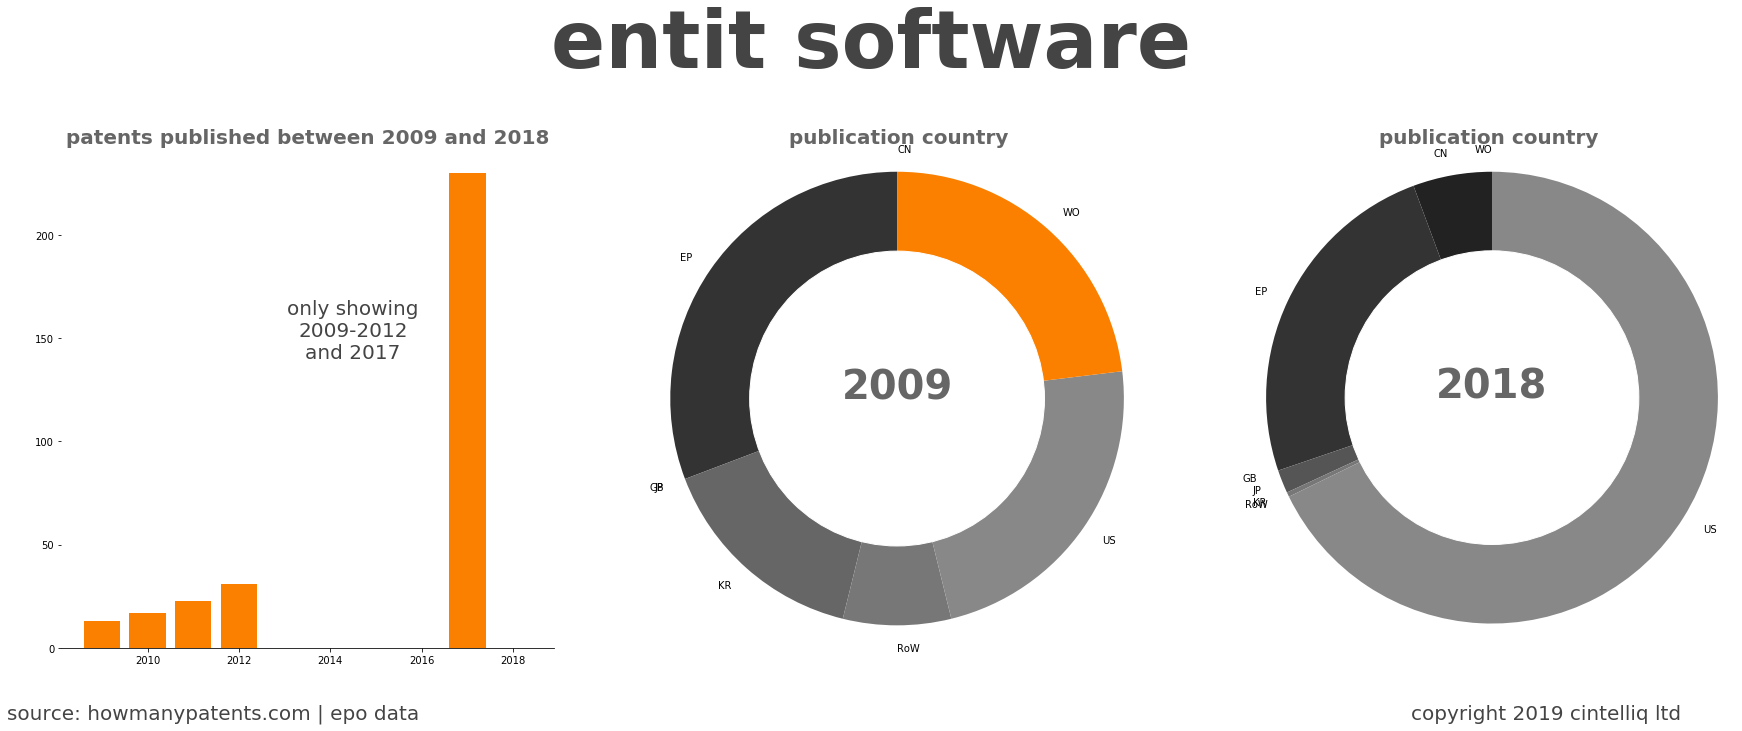 summary of patents for Entit Software